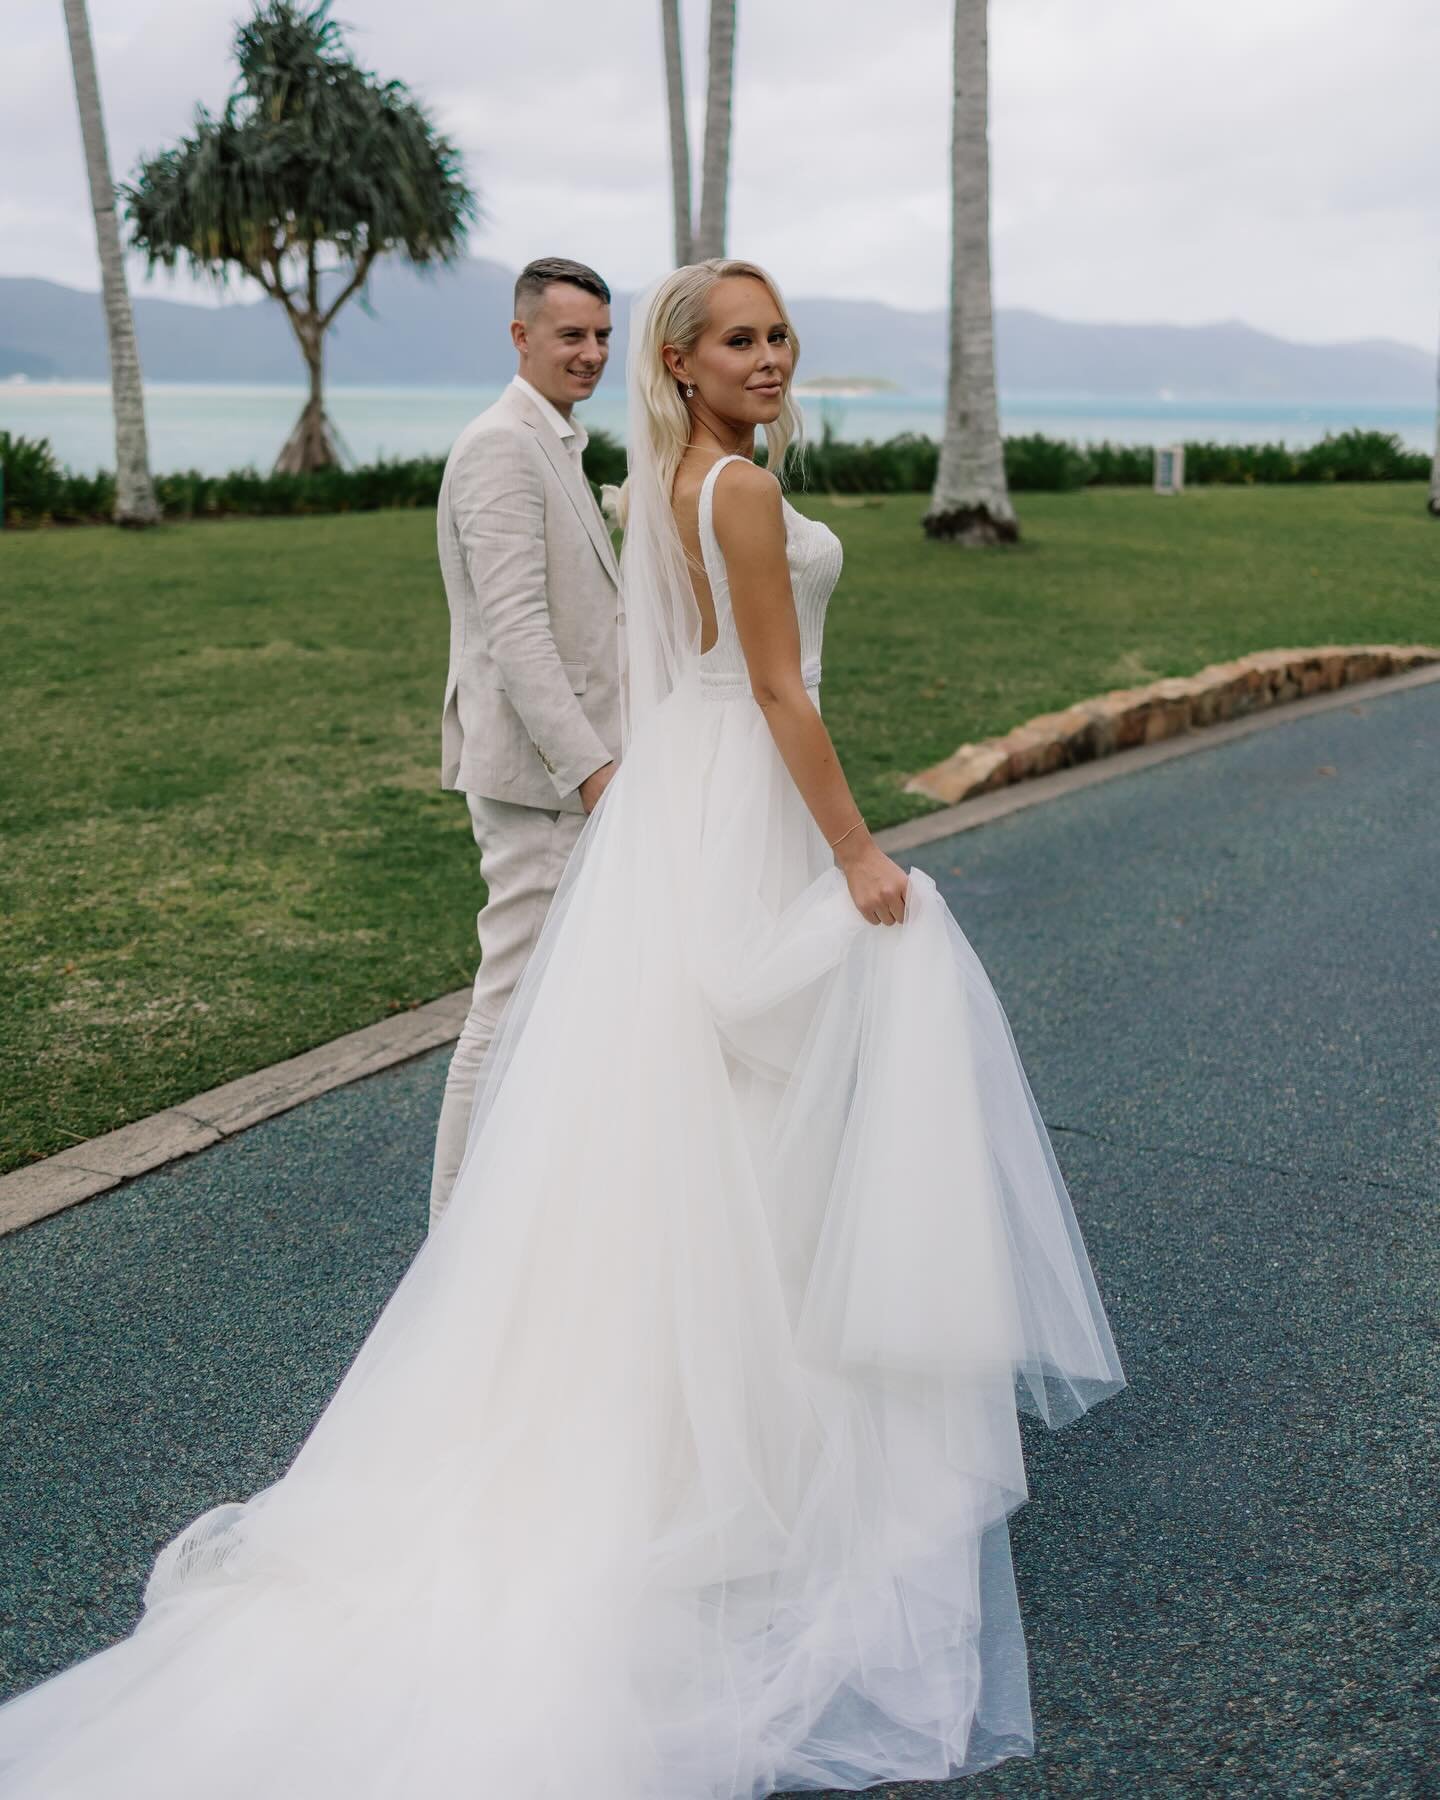 C + J 🤍

We pinch ourselves when we stop and think about all our gorgeous couples in such incredible settings like these! 

Venue / @intercontinentalhaymanisland 
Photo / @mitchbirchallstudios 
Dress / @raffaeleciucabridal 
MUA / @joannedmakeup 
Hai